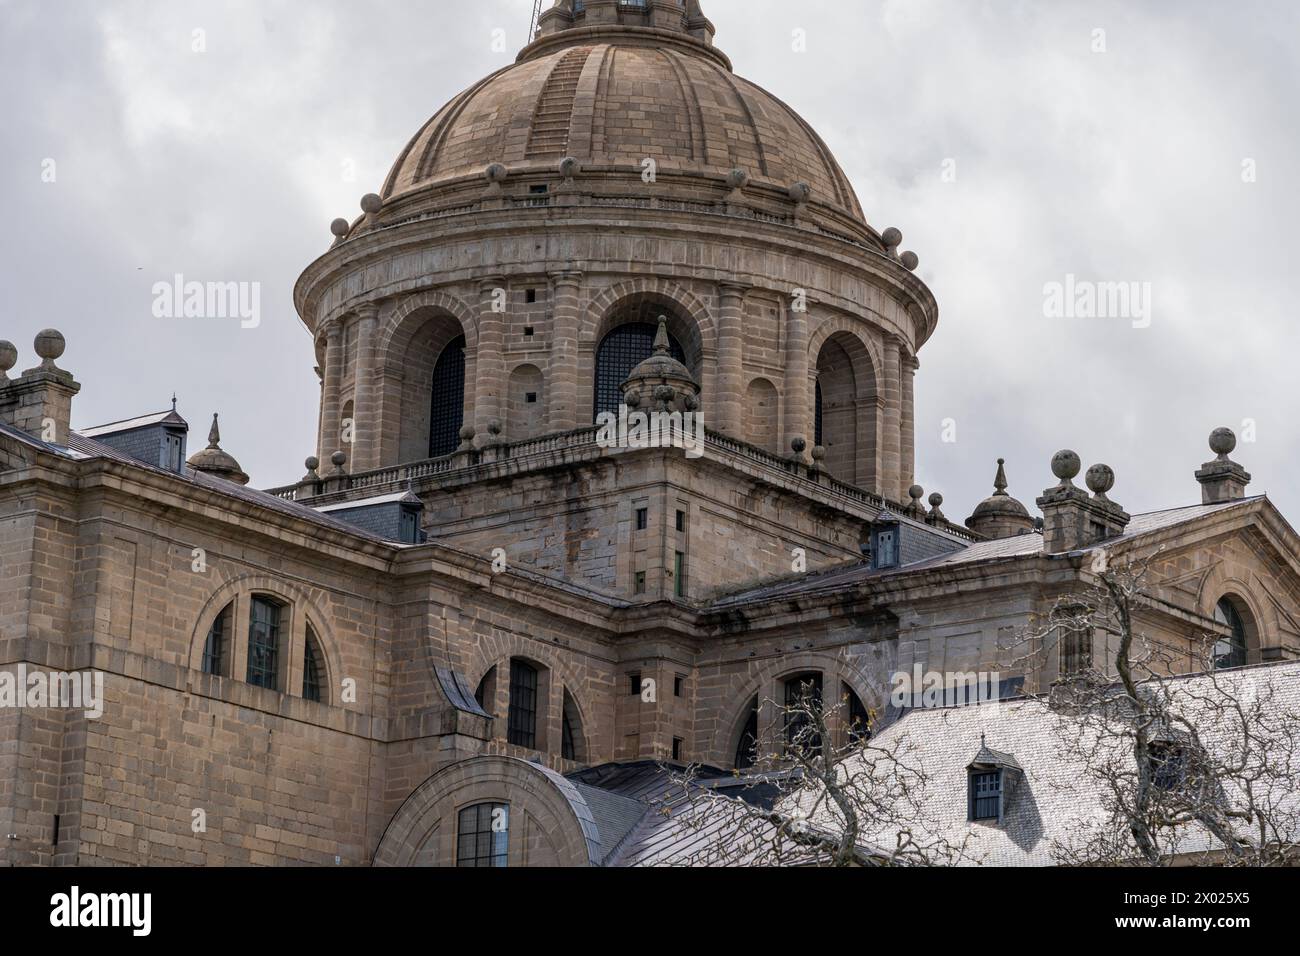 The grand dome of the Escorial Monastery near Madrid, Spain, rises majestically against a backdrop of dynamic clouds. Stock Photo